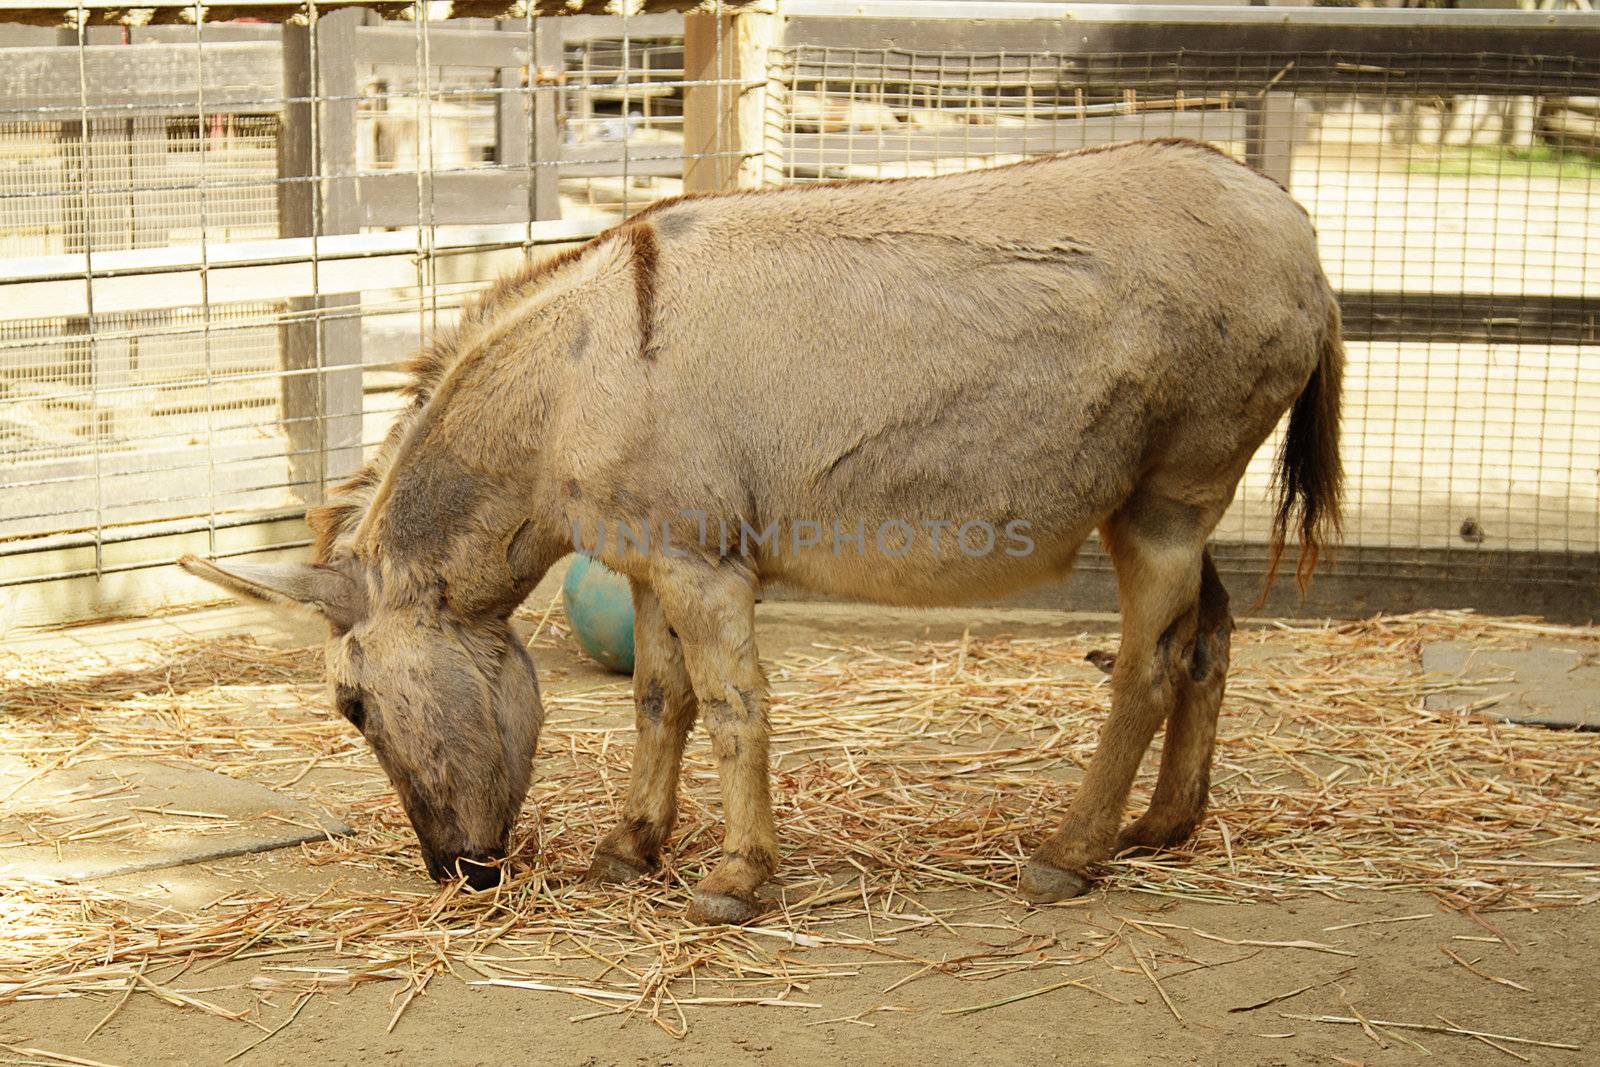 A donkey eating in the cage in the zoo